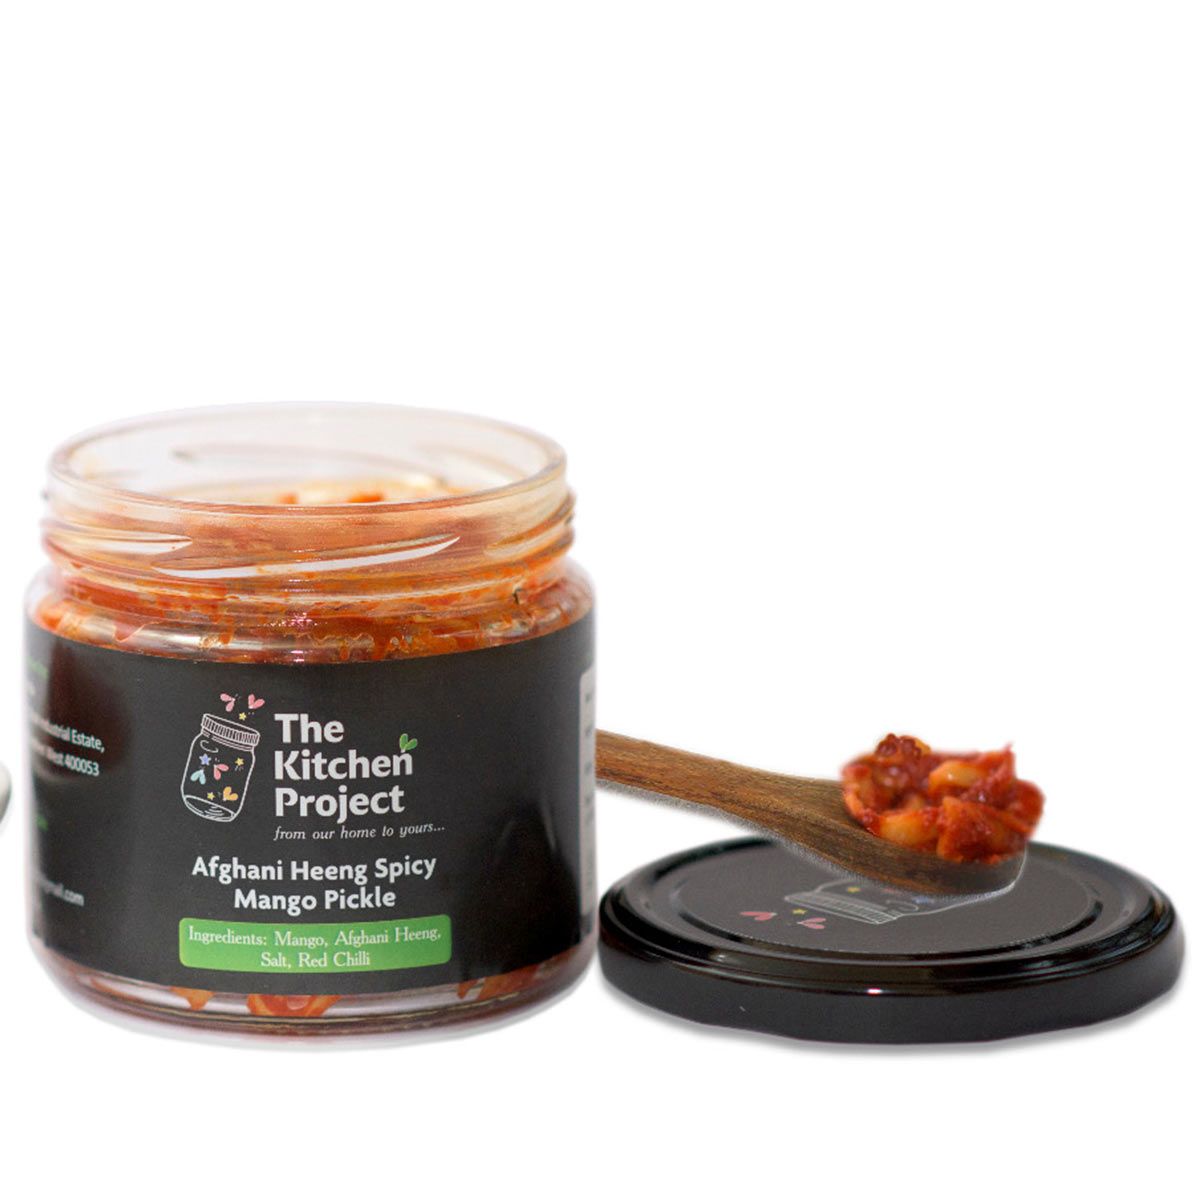 Afghani Heeng Spicy Mango Pickle – The Kitchen Project